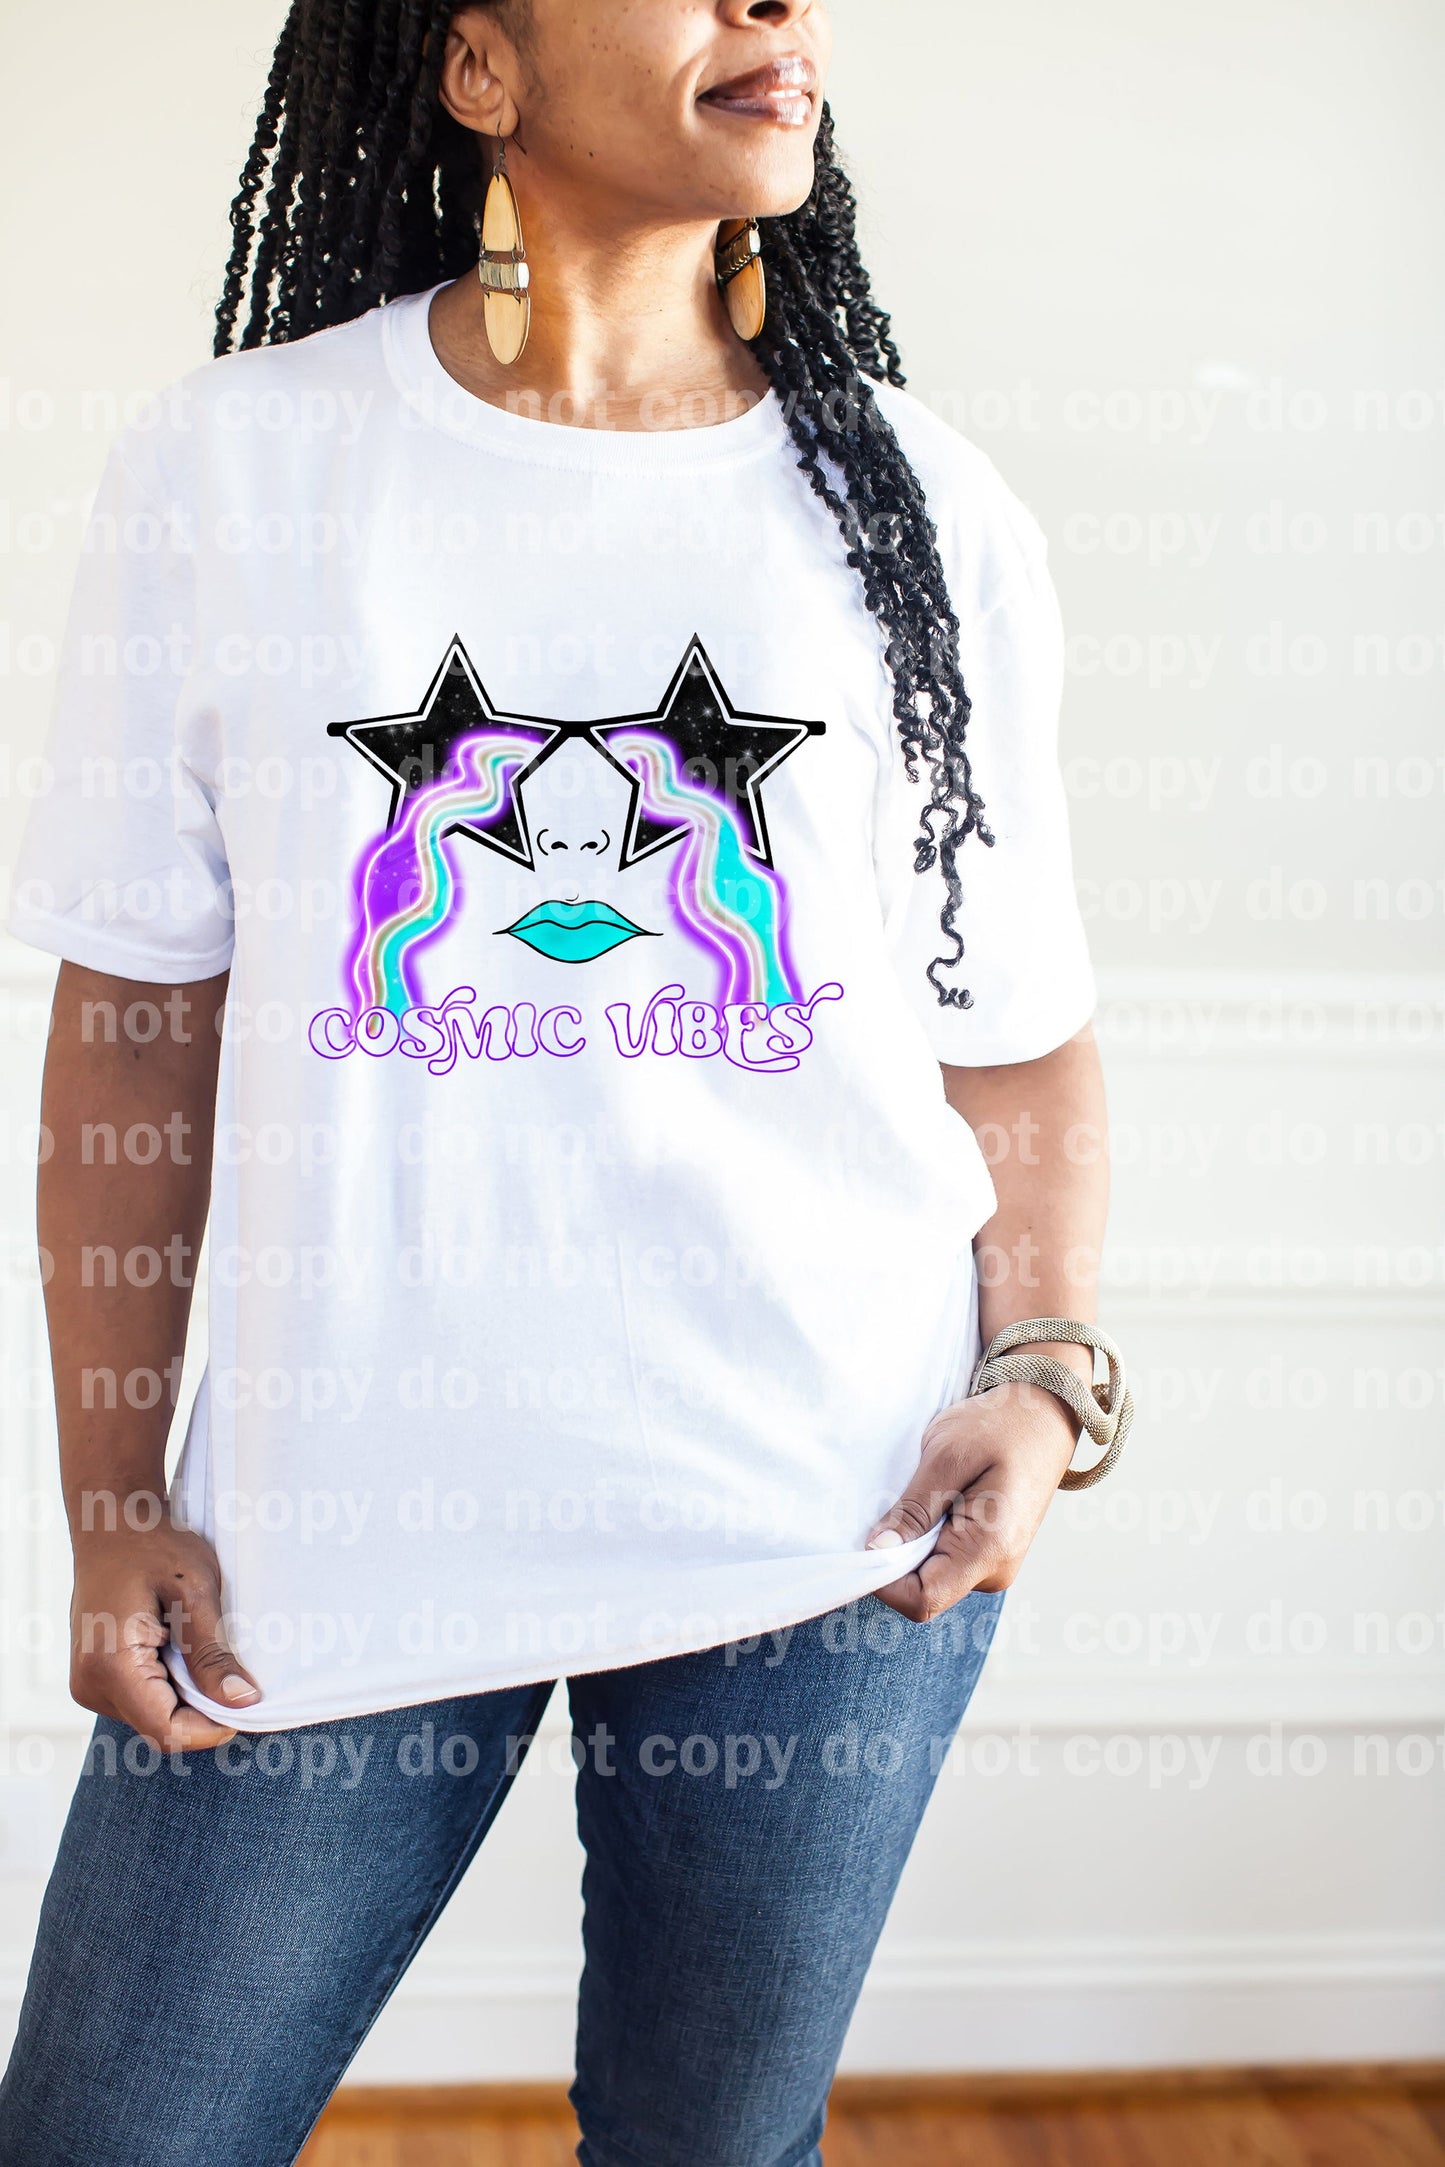 Cosmic Vibes Dream Print or Sublimation Print